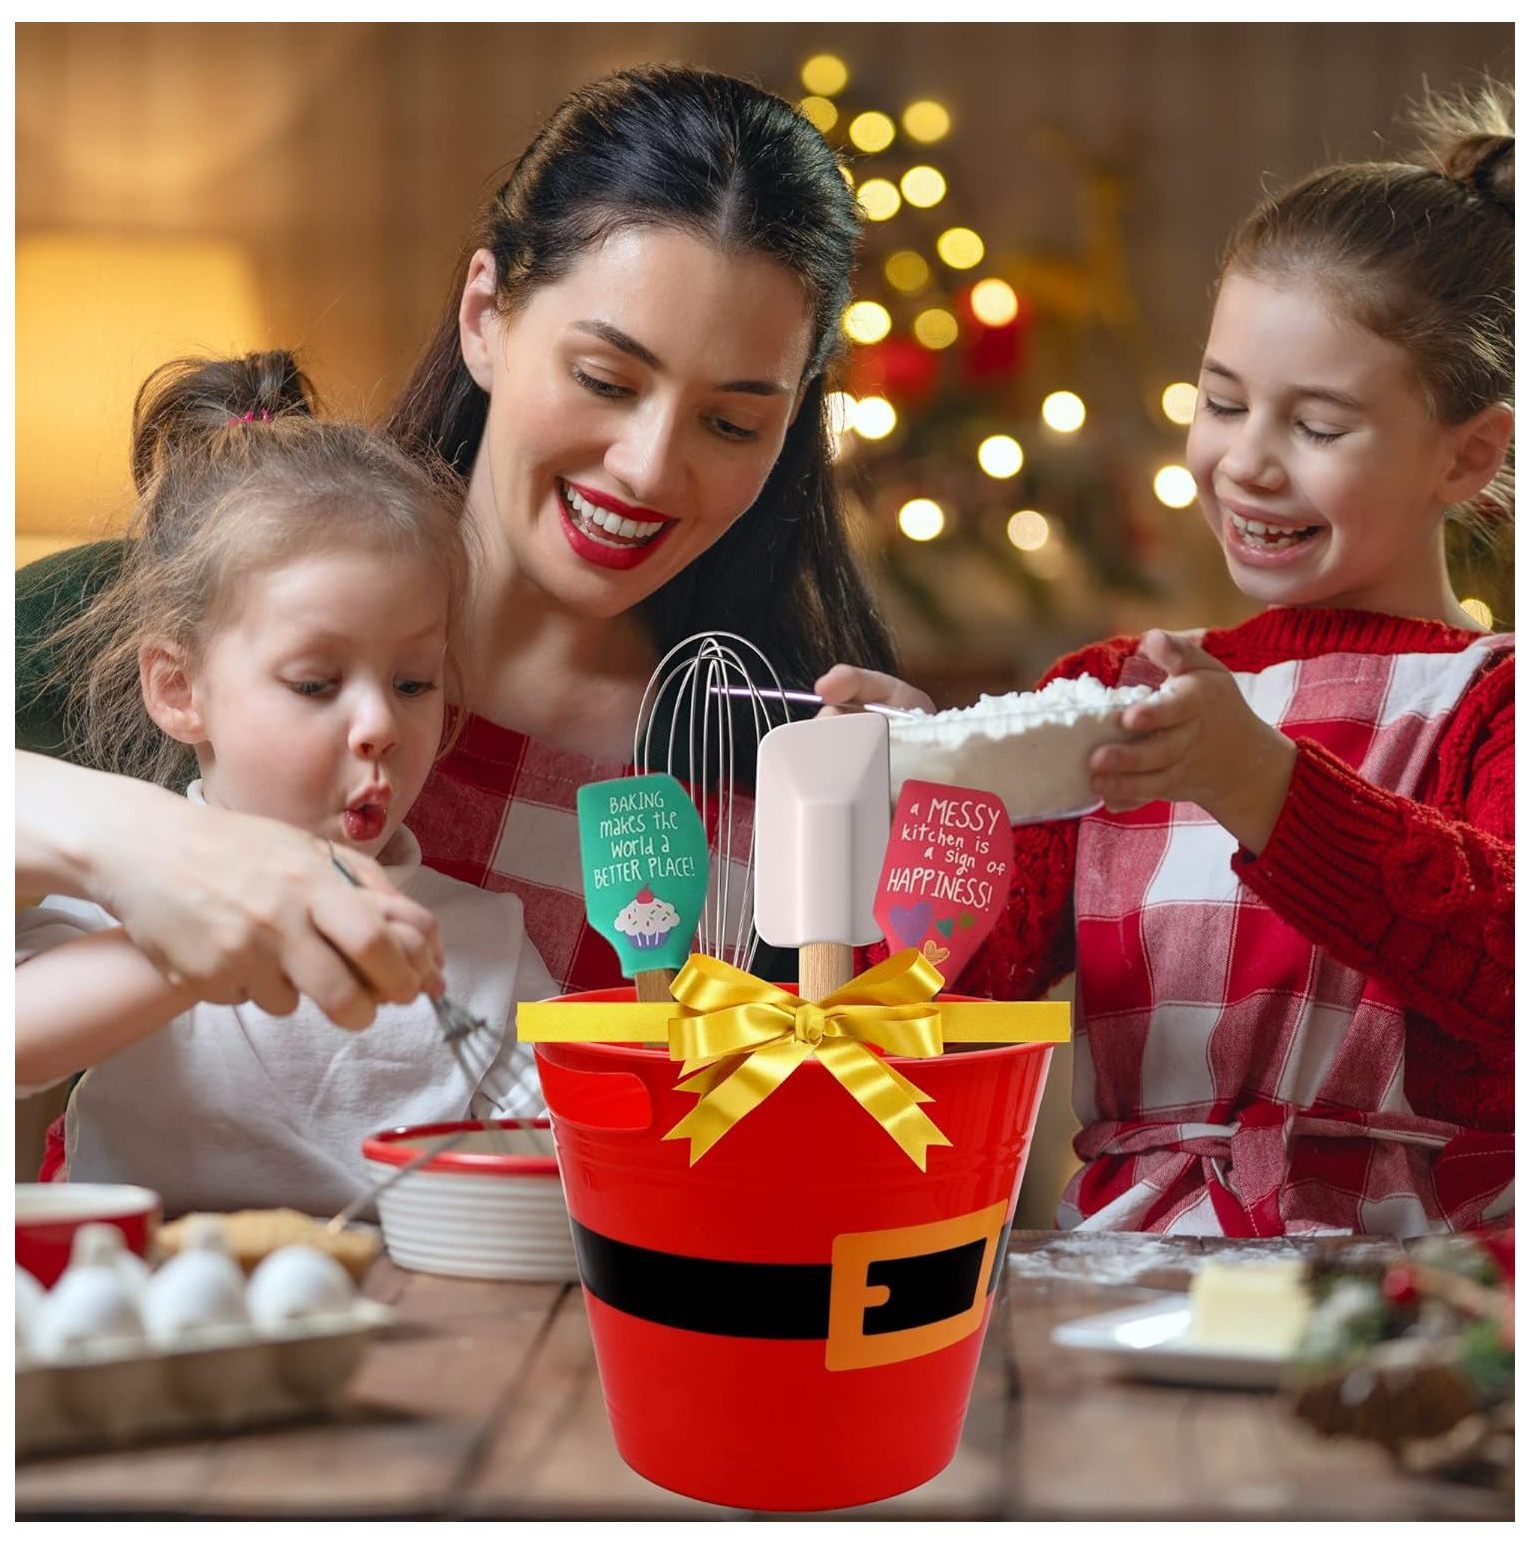 LLE Plastic Buckets with Handles, Red Santa Belt Round Basket,  Multi-Purpose Container Decorative Home Kitchen Candy Bars Vase Toy Baskets  for Christmas Winter Holiday Party Supplies Set of 4 